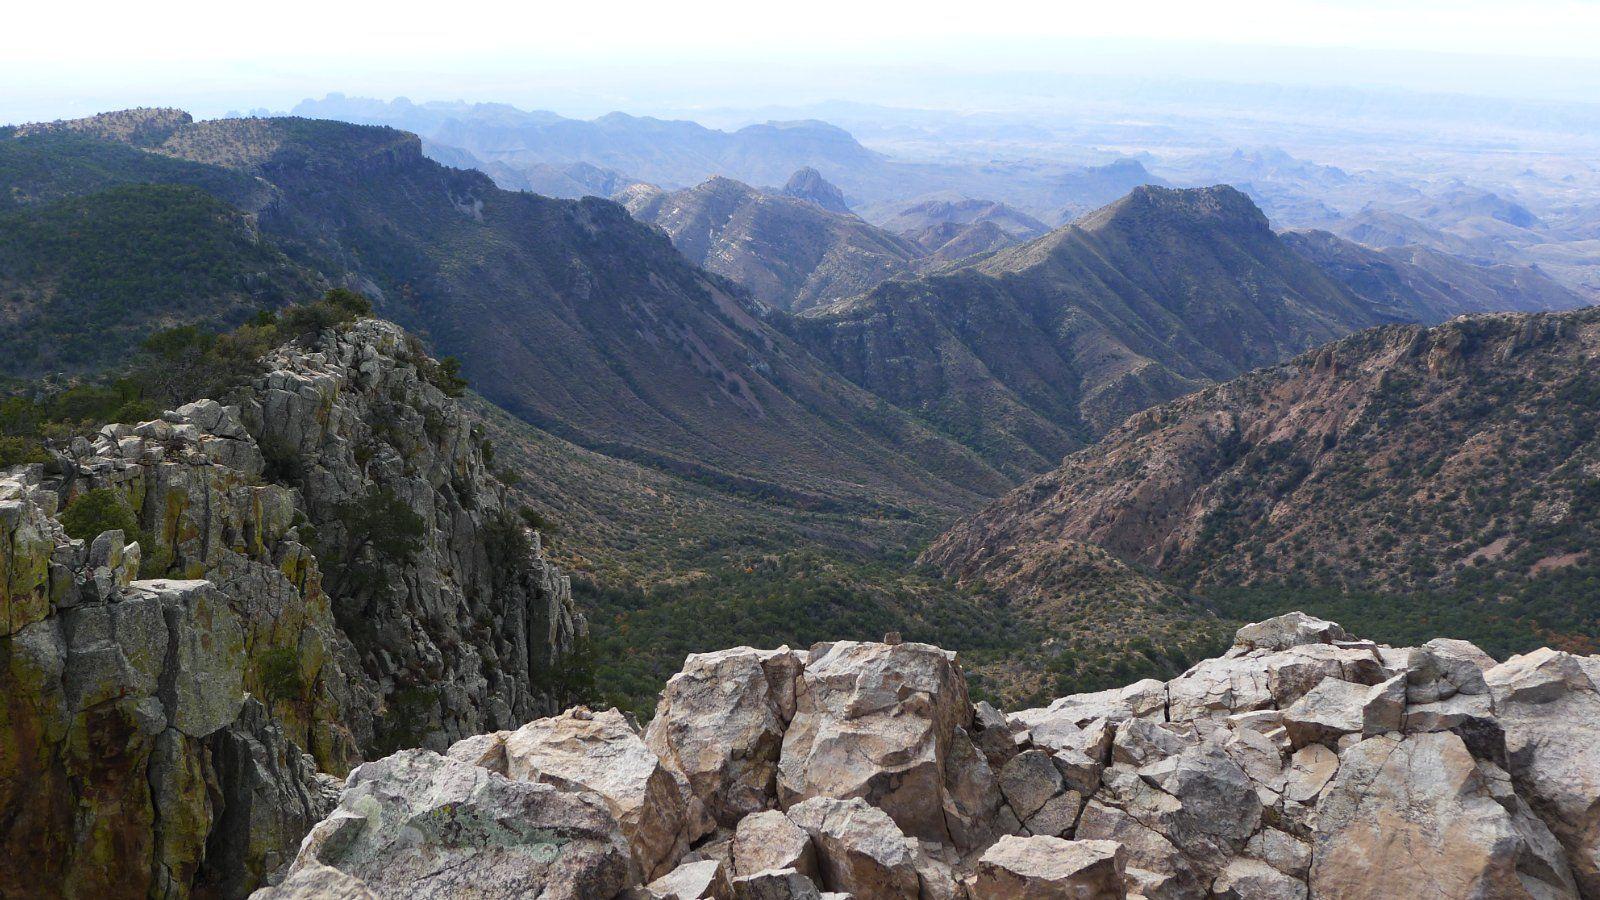 View from Emory Peak, Big Bend National Park